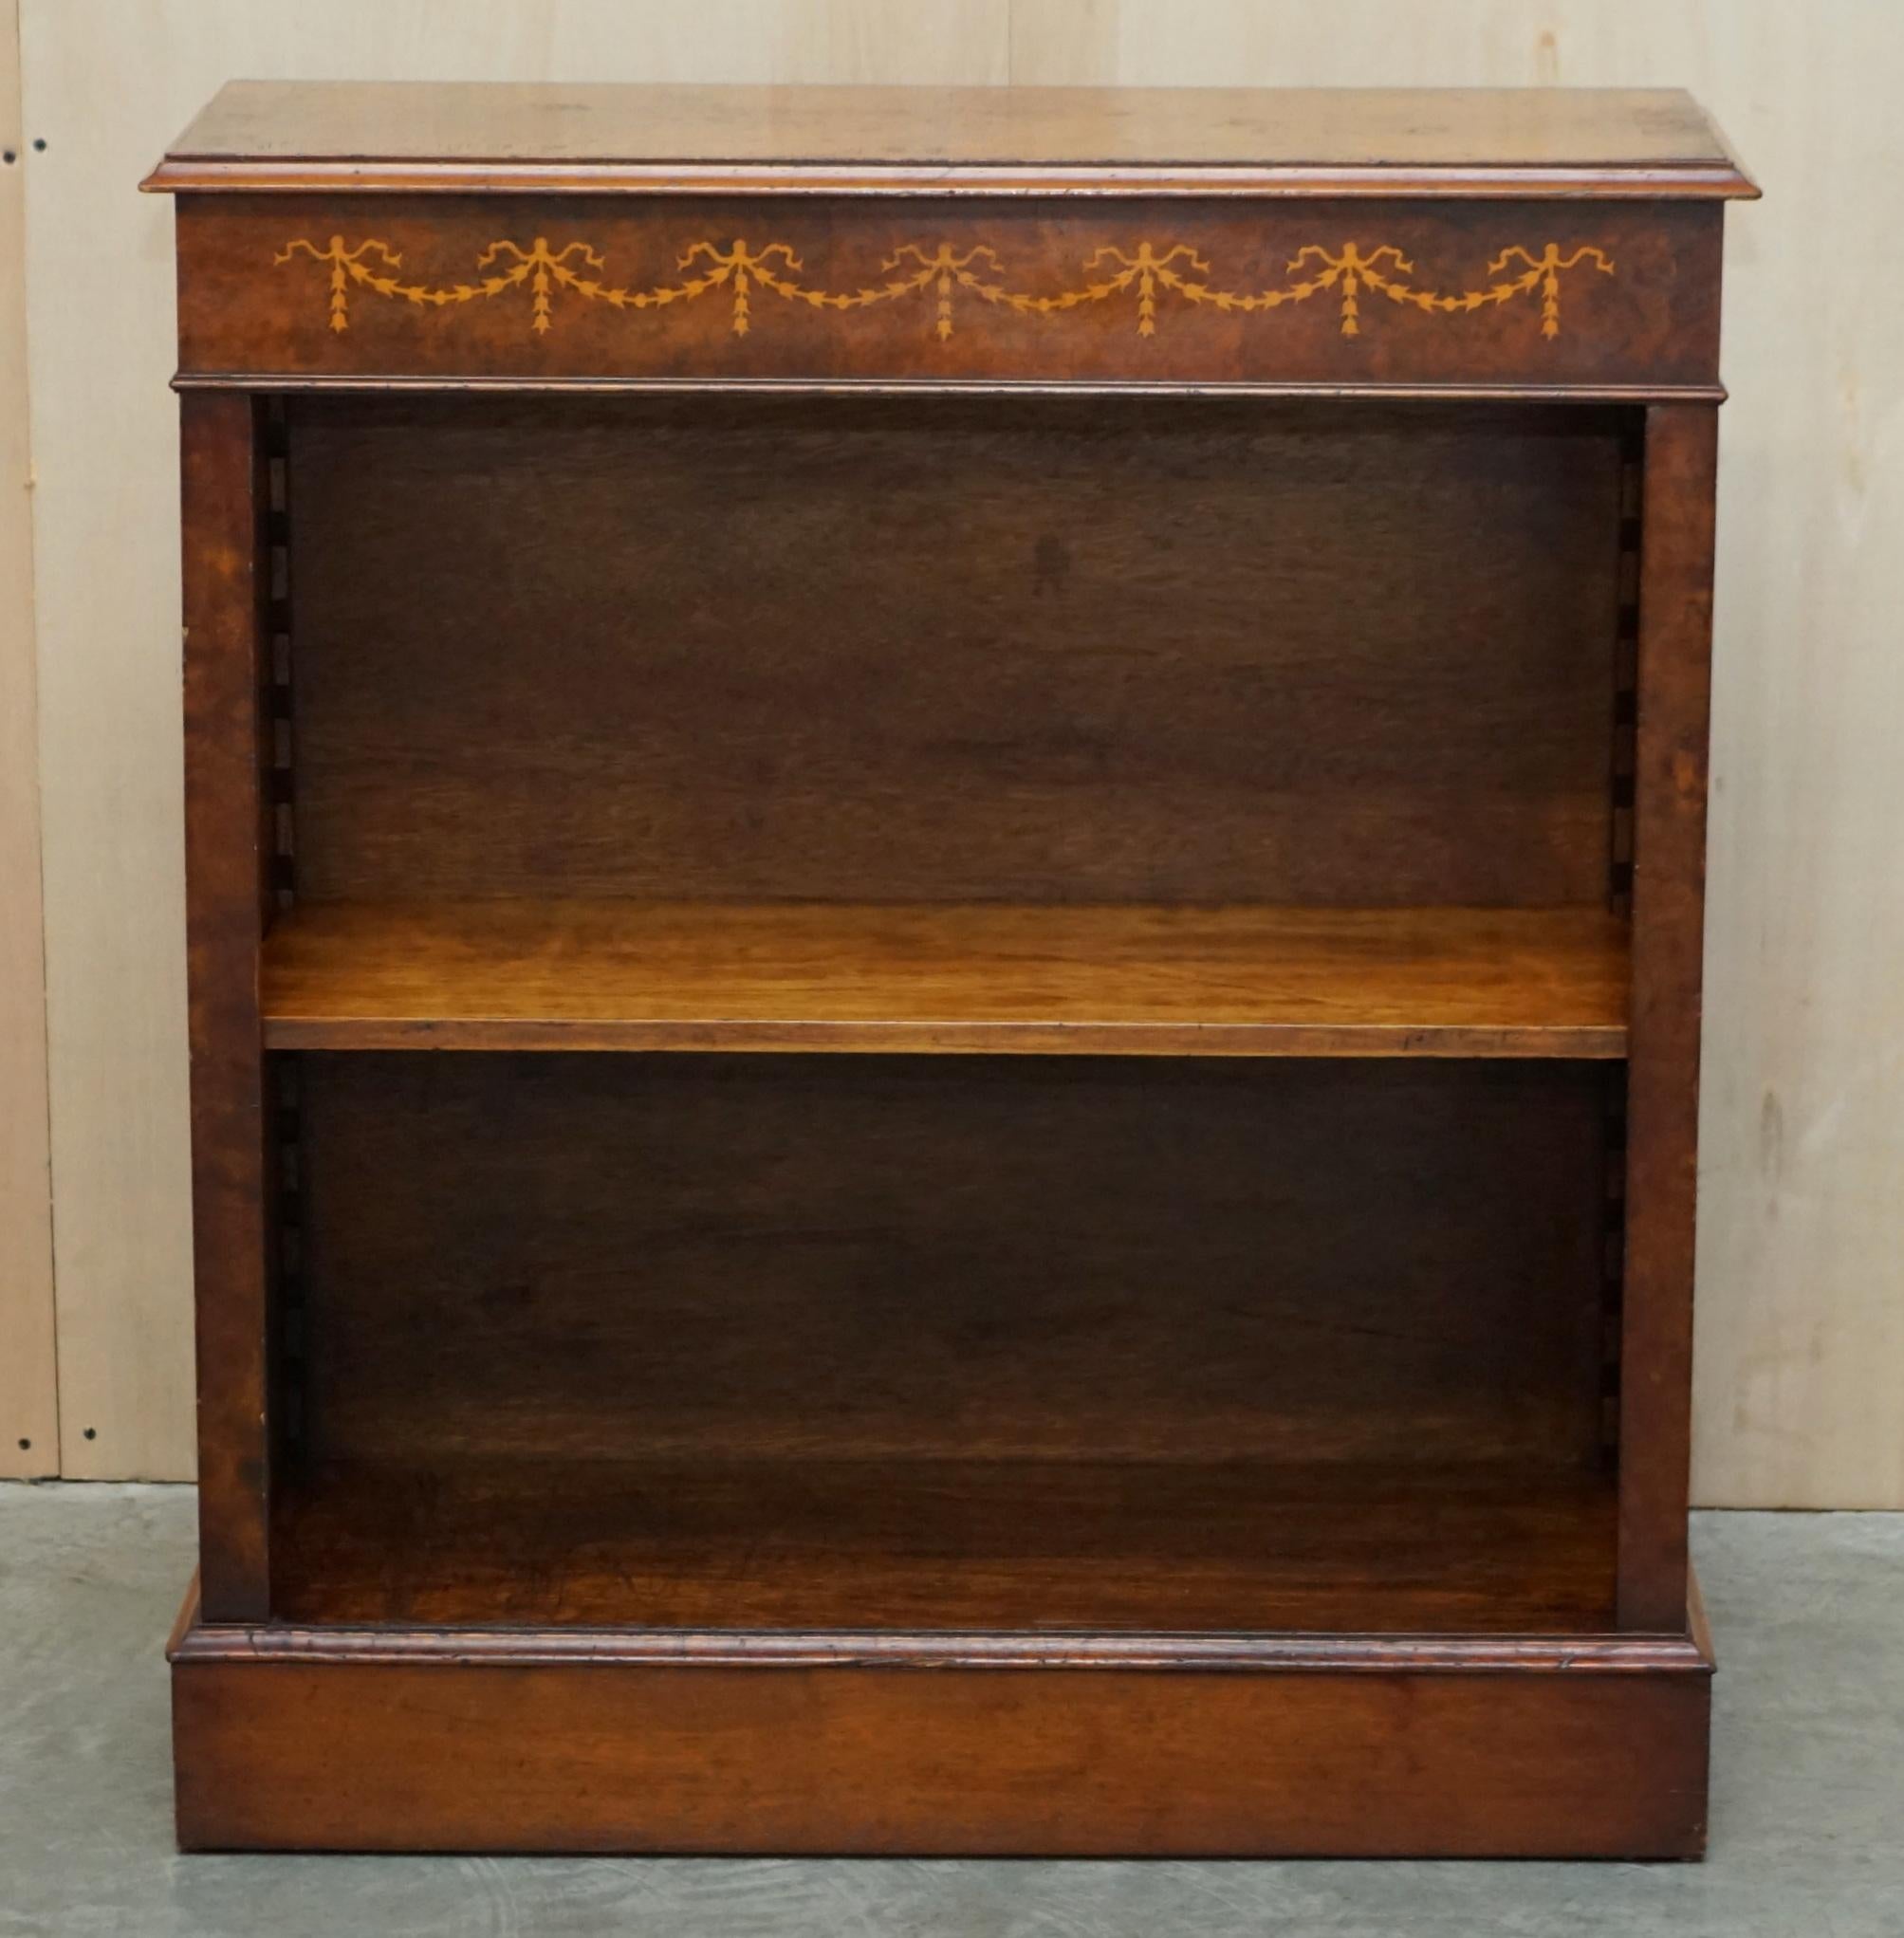 We are delighted to offer for this lovely Brights of Nettlebed Burr Elm, Walnut inlaid, Sheraton Revival style dwarf open library bookcase

A very good looking well made and decorative piece, the shelf is height adjustable and or removable so it